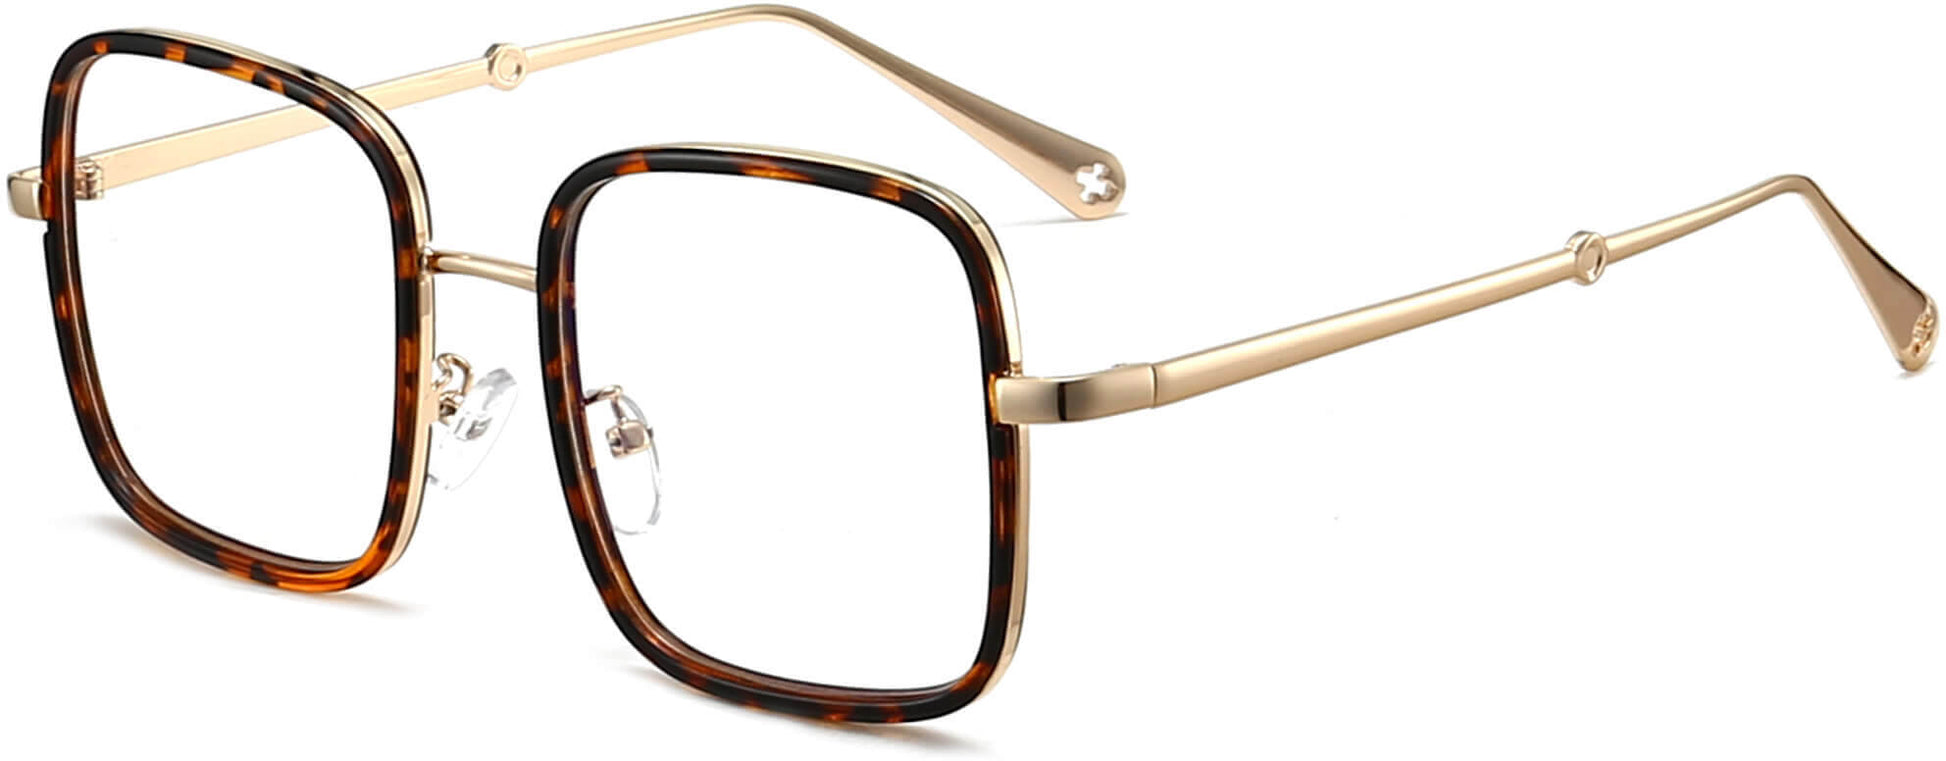 Diordie Square Tortoise Eyeglasses from ANRRI, angle view